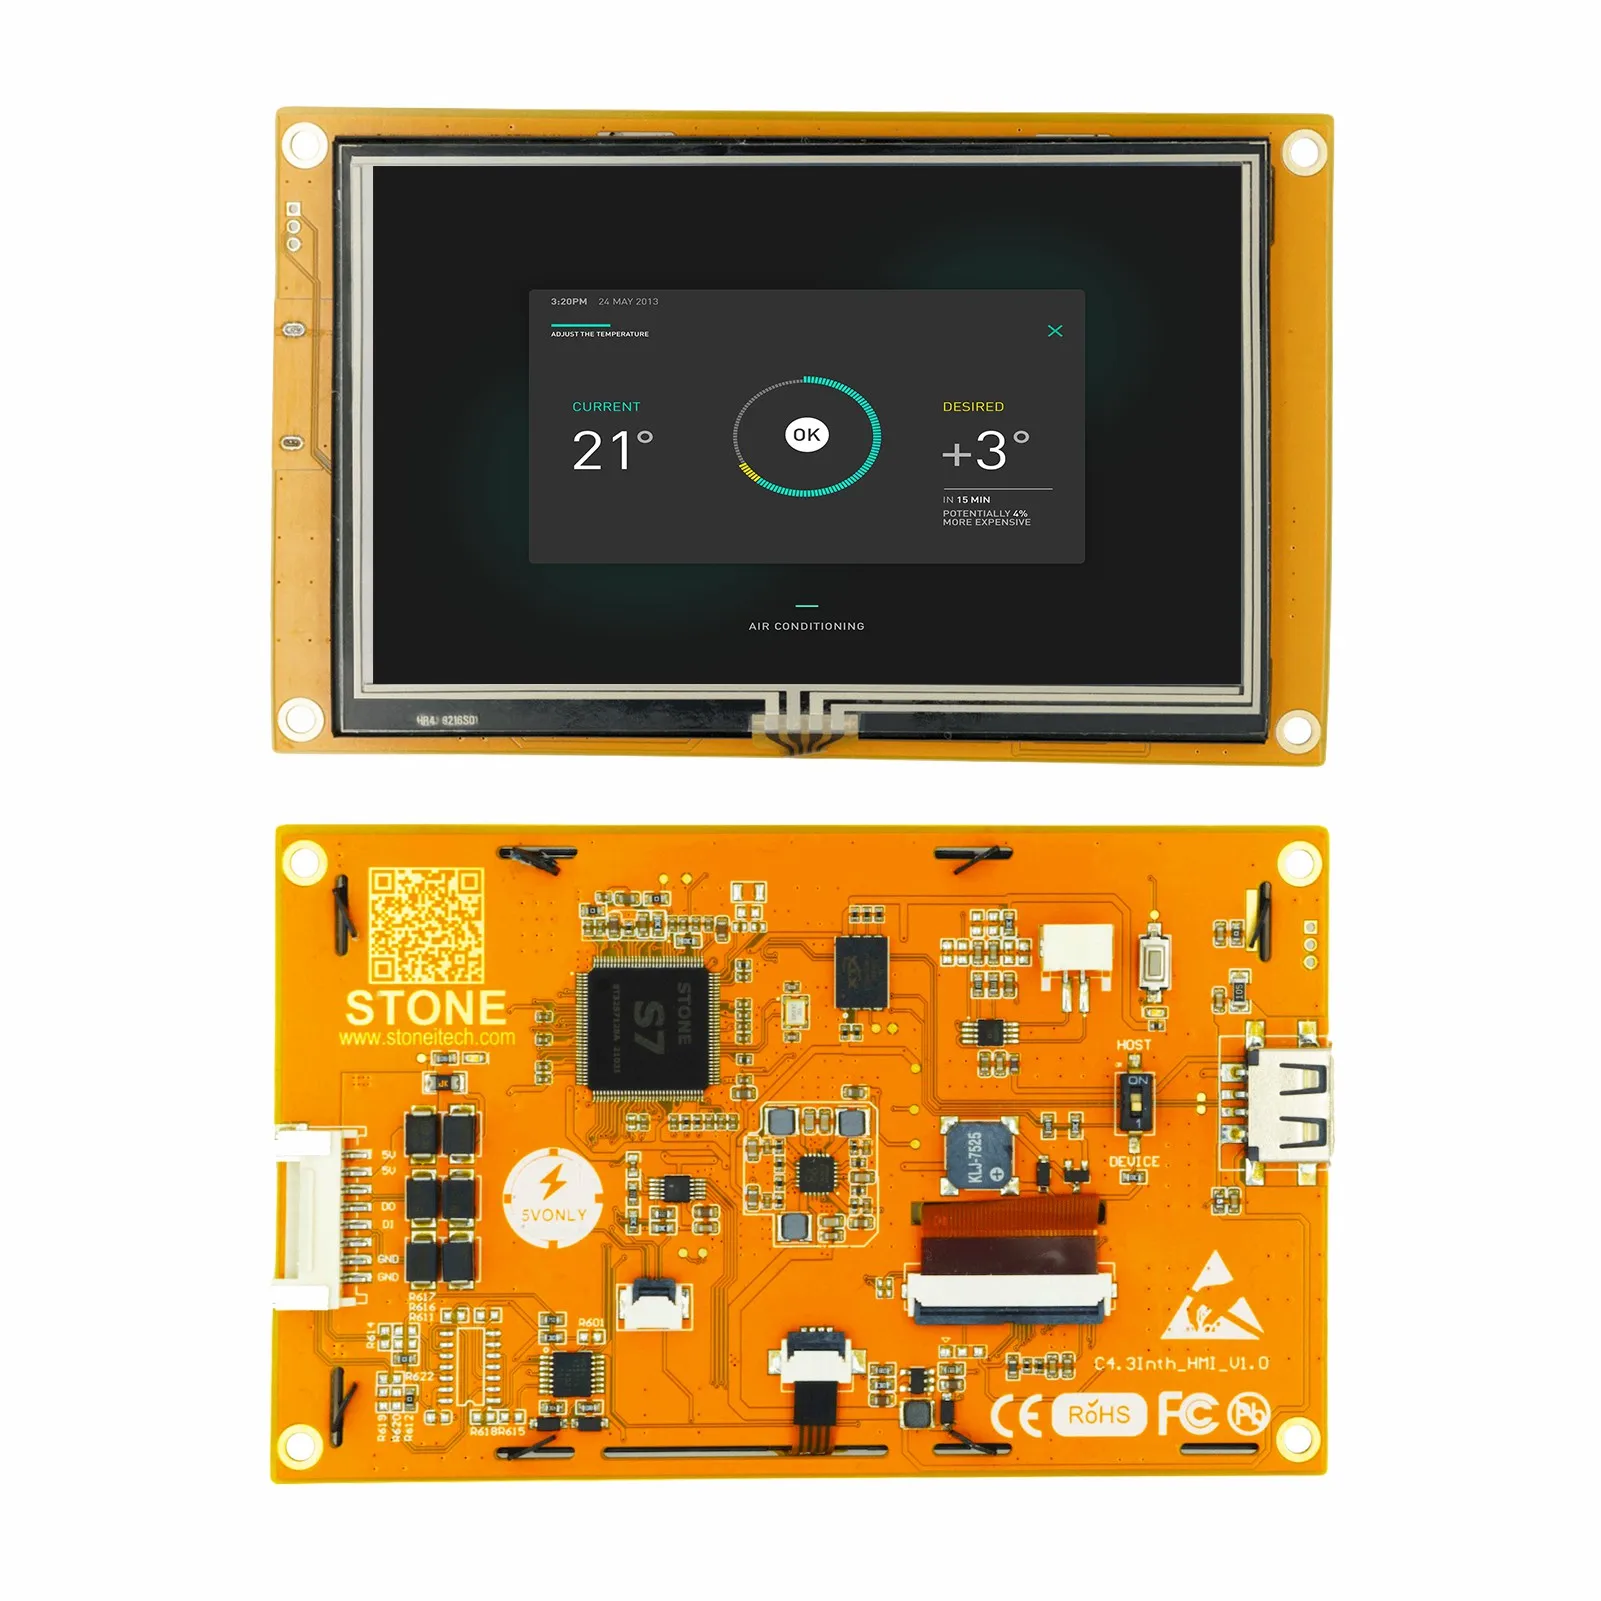 SCBRHMI 4.3 Inch LCD TFT HMI Display Module Intelligent Series RGB 65K Color Resistive Touch Panel Without Enclosure